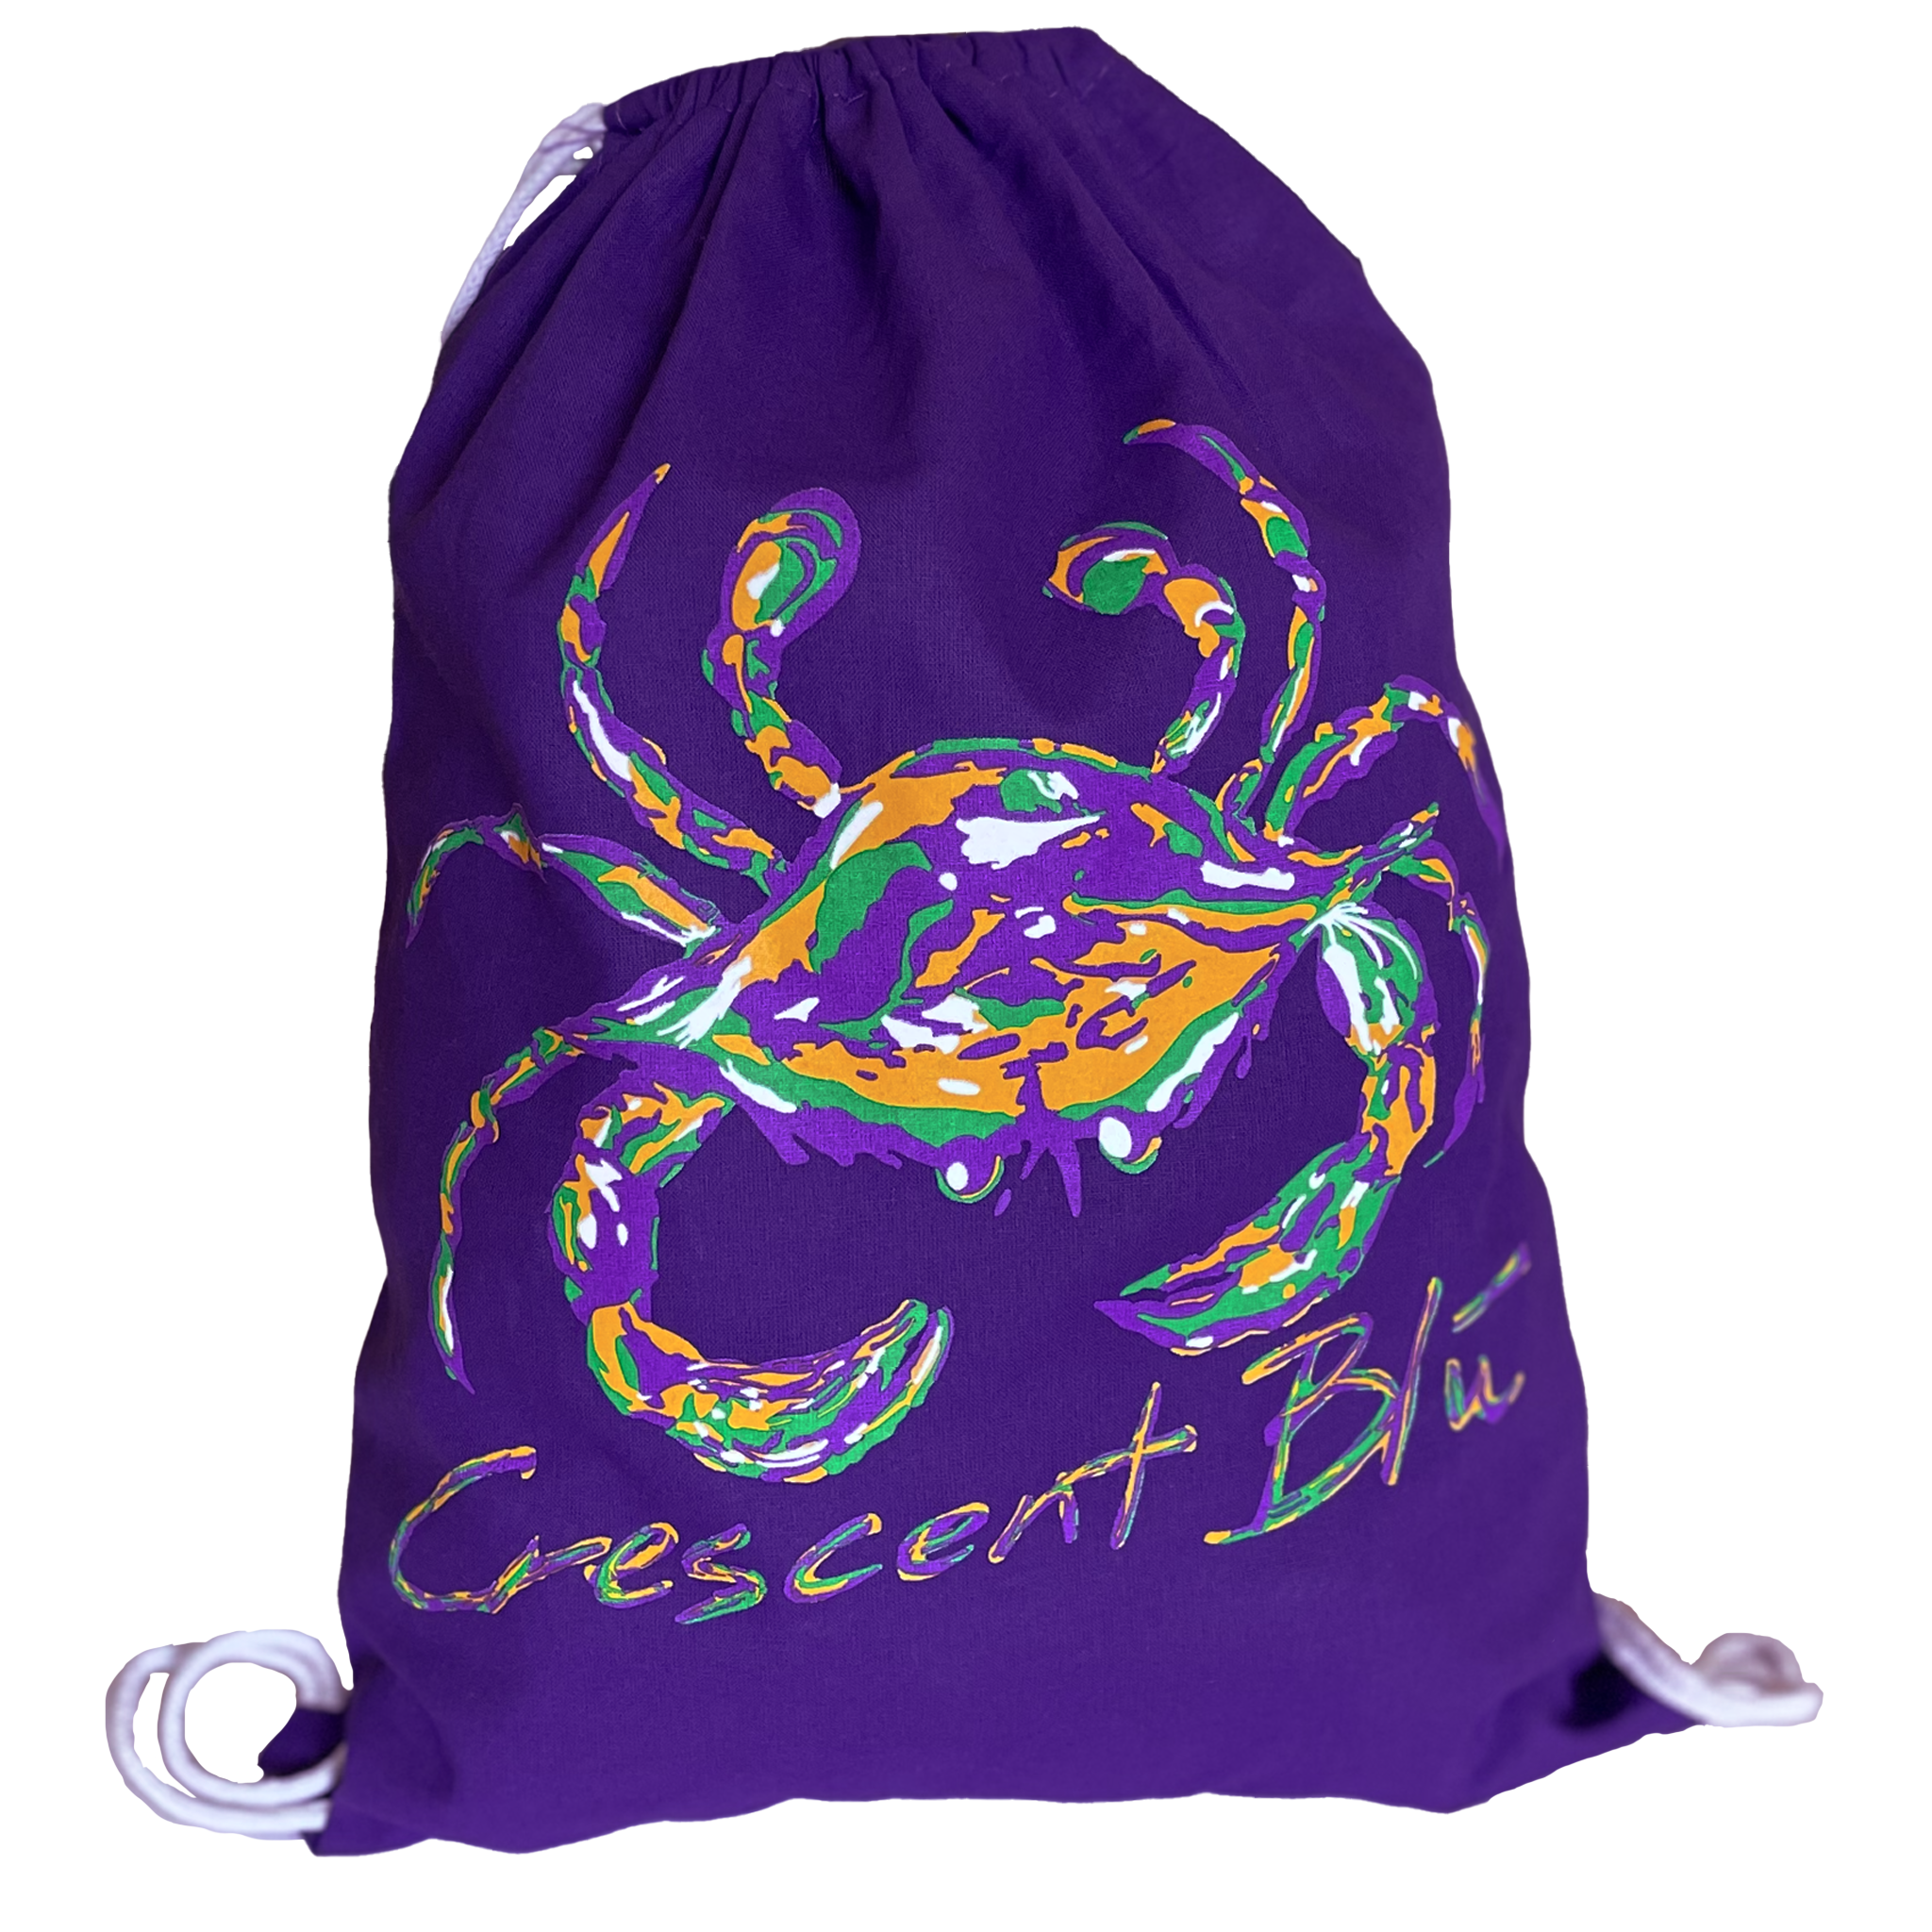 A purple drawstring bag with a Mardi Gras Crab on the front with Crescent Blú written in purple, green, and gold.